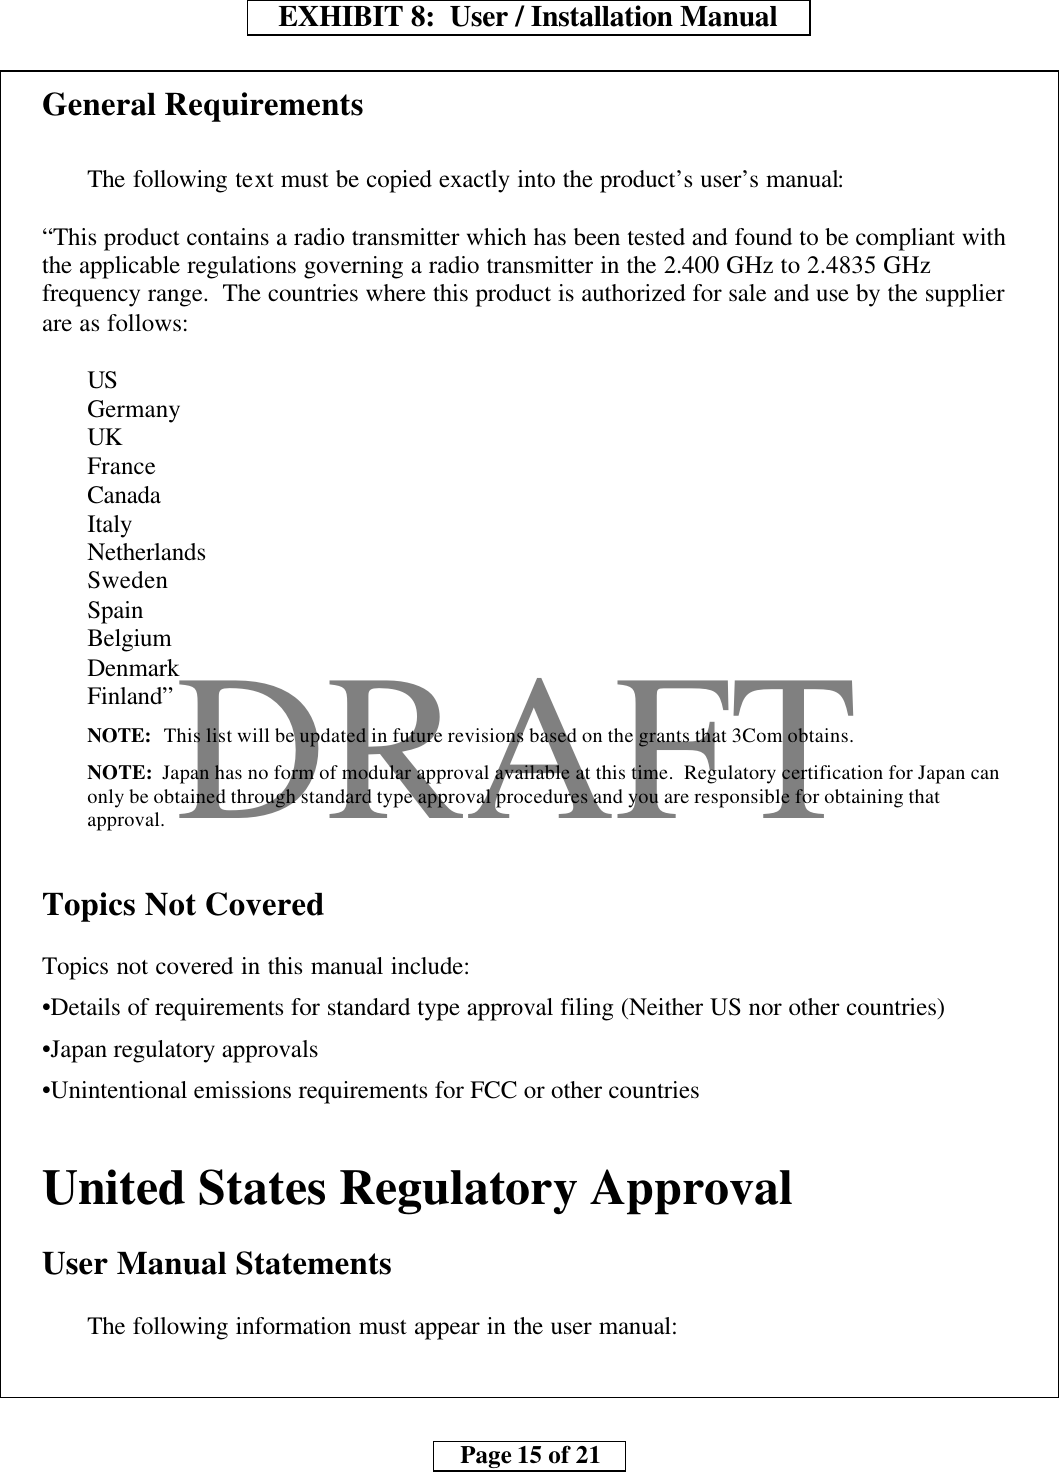     EXHIBIT 8:  User / Installation Manual        Page 15 of 21    DRAFTGeneral RequirementsThe following text must be copied exactly into the product’s user’s manual:“This product contains a radio transmitter which has been tested and found to be compliant withthe applicable regulations governing a radio transmitter in the 2.400 GHz to 2.4835 GHzfrequency range.  The countries where this product is authorized for sale and use by the supplierare as follows:USGermanyUKFranceCanadaItalyNetherlandsSwedenSpainBelgiumDenmarkFinland”NOTE:  This list will be updated in future revisions based on the grants that 3Com obtains.NOTE:  Japan has no form of modular approval available at this time.  Regulatory certification for Japan canonly be obtained through standard type approval procedures and you are responsible for obtaining thatapproval.Topics Not CoveredTopics not covered in this manual include:•Details of requirements for standard type approval filing (Neither US nor other countries)•Japan regulatory approvals•Unintentional emissions requirements for FCC or other countriesUnited States Regulatory ApprovalUser Manual StatementsThe following information must appear in the user manual: